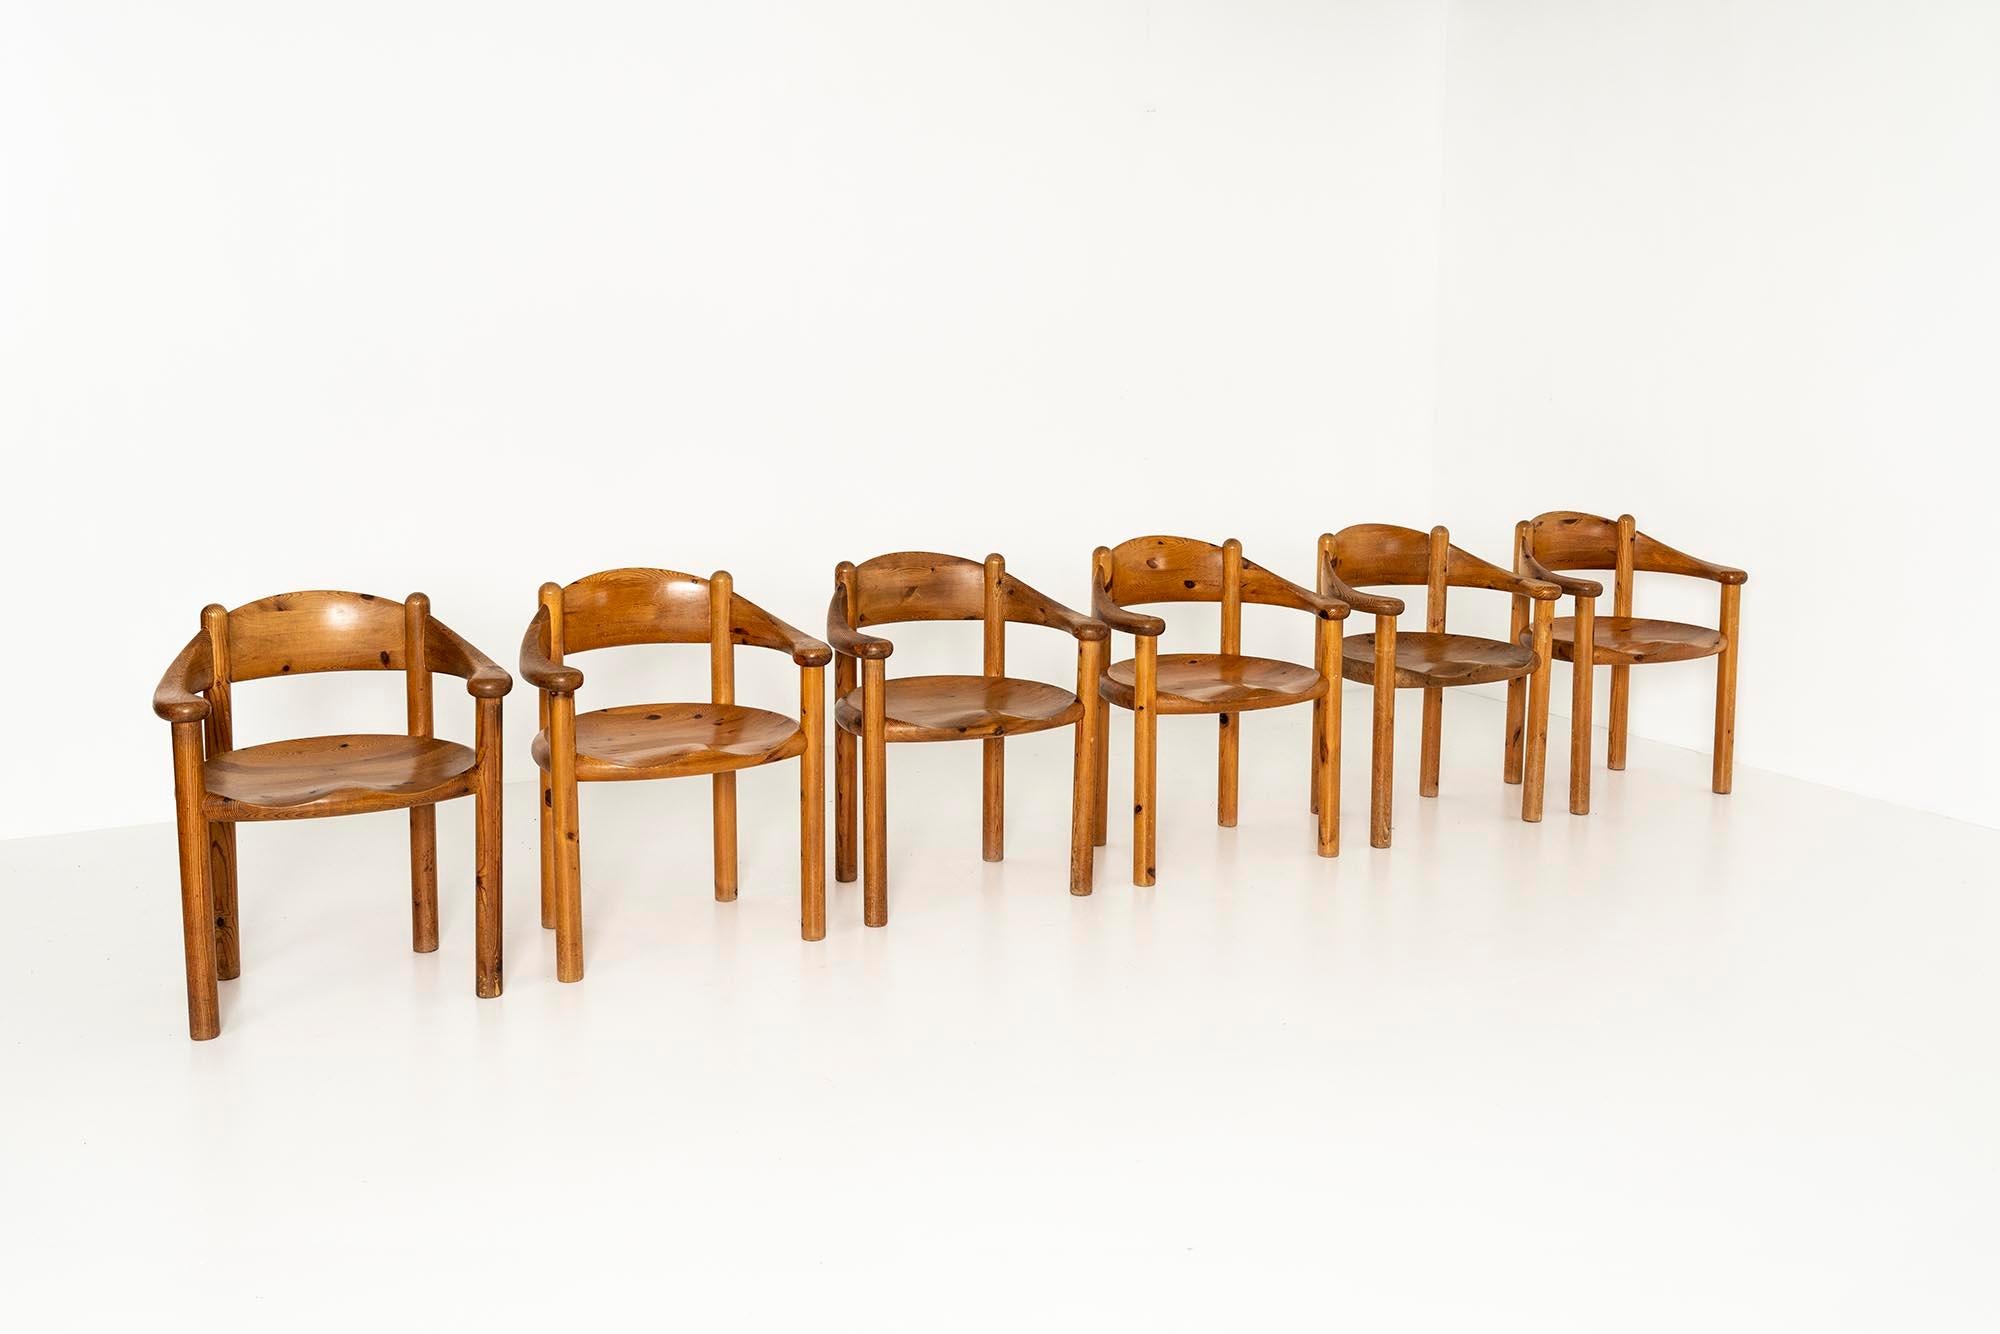 Great set of six Danish armchairs by Rainer Daumiller for Hirtshals Sawmill from the 1970s. Despite their solid look due to the material, the curved backrests that smoothly transition into the armrests, give the chairs a soft touch. They are made of